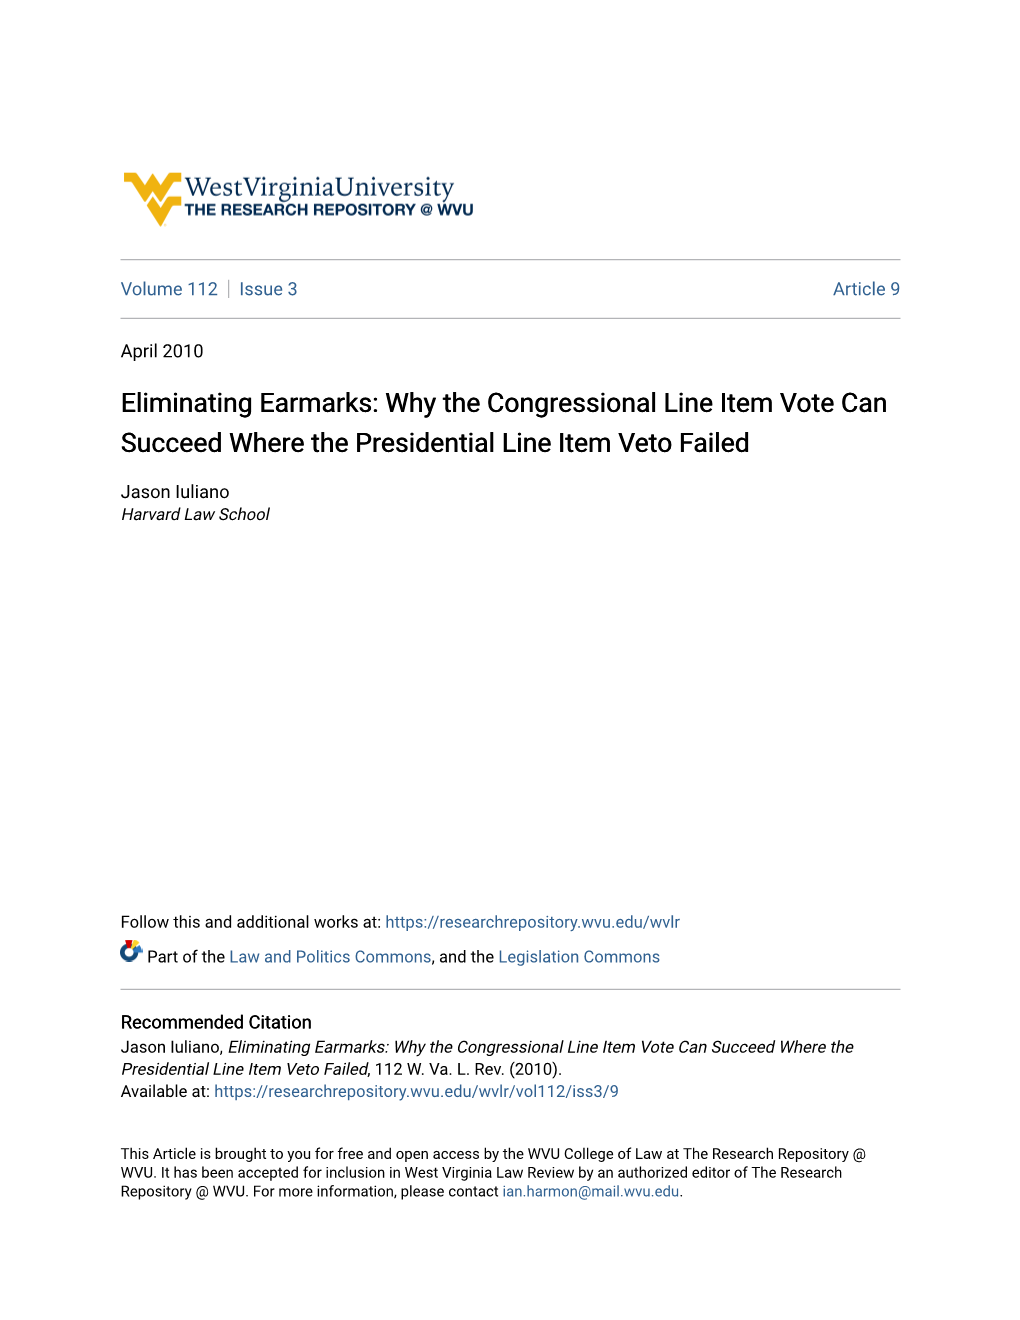 Why the Congressional Line Item Vote Can Succeed Where the Presidential Line Item Veto Failed